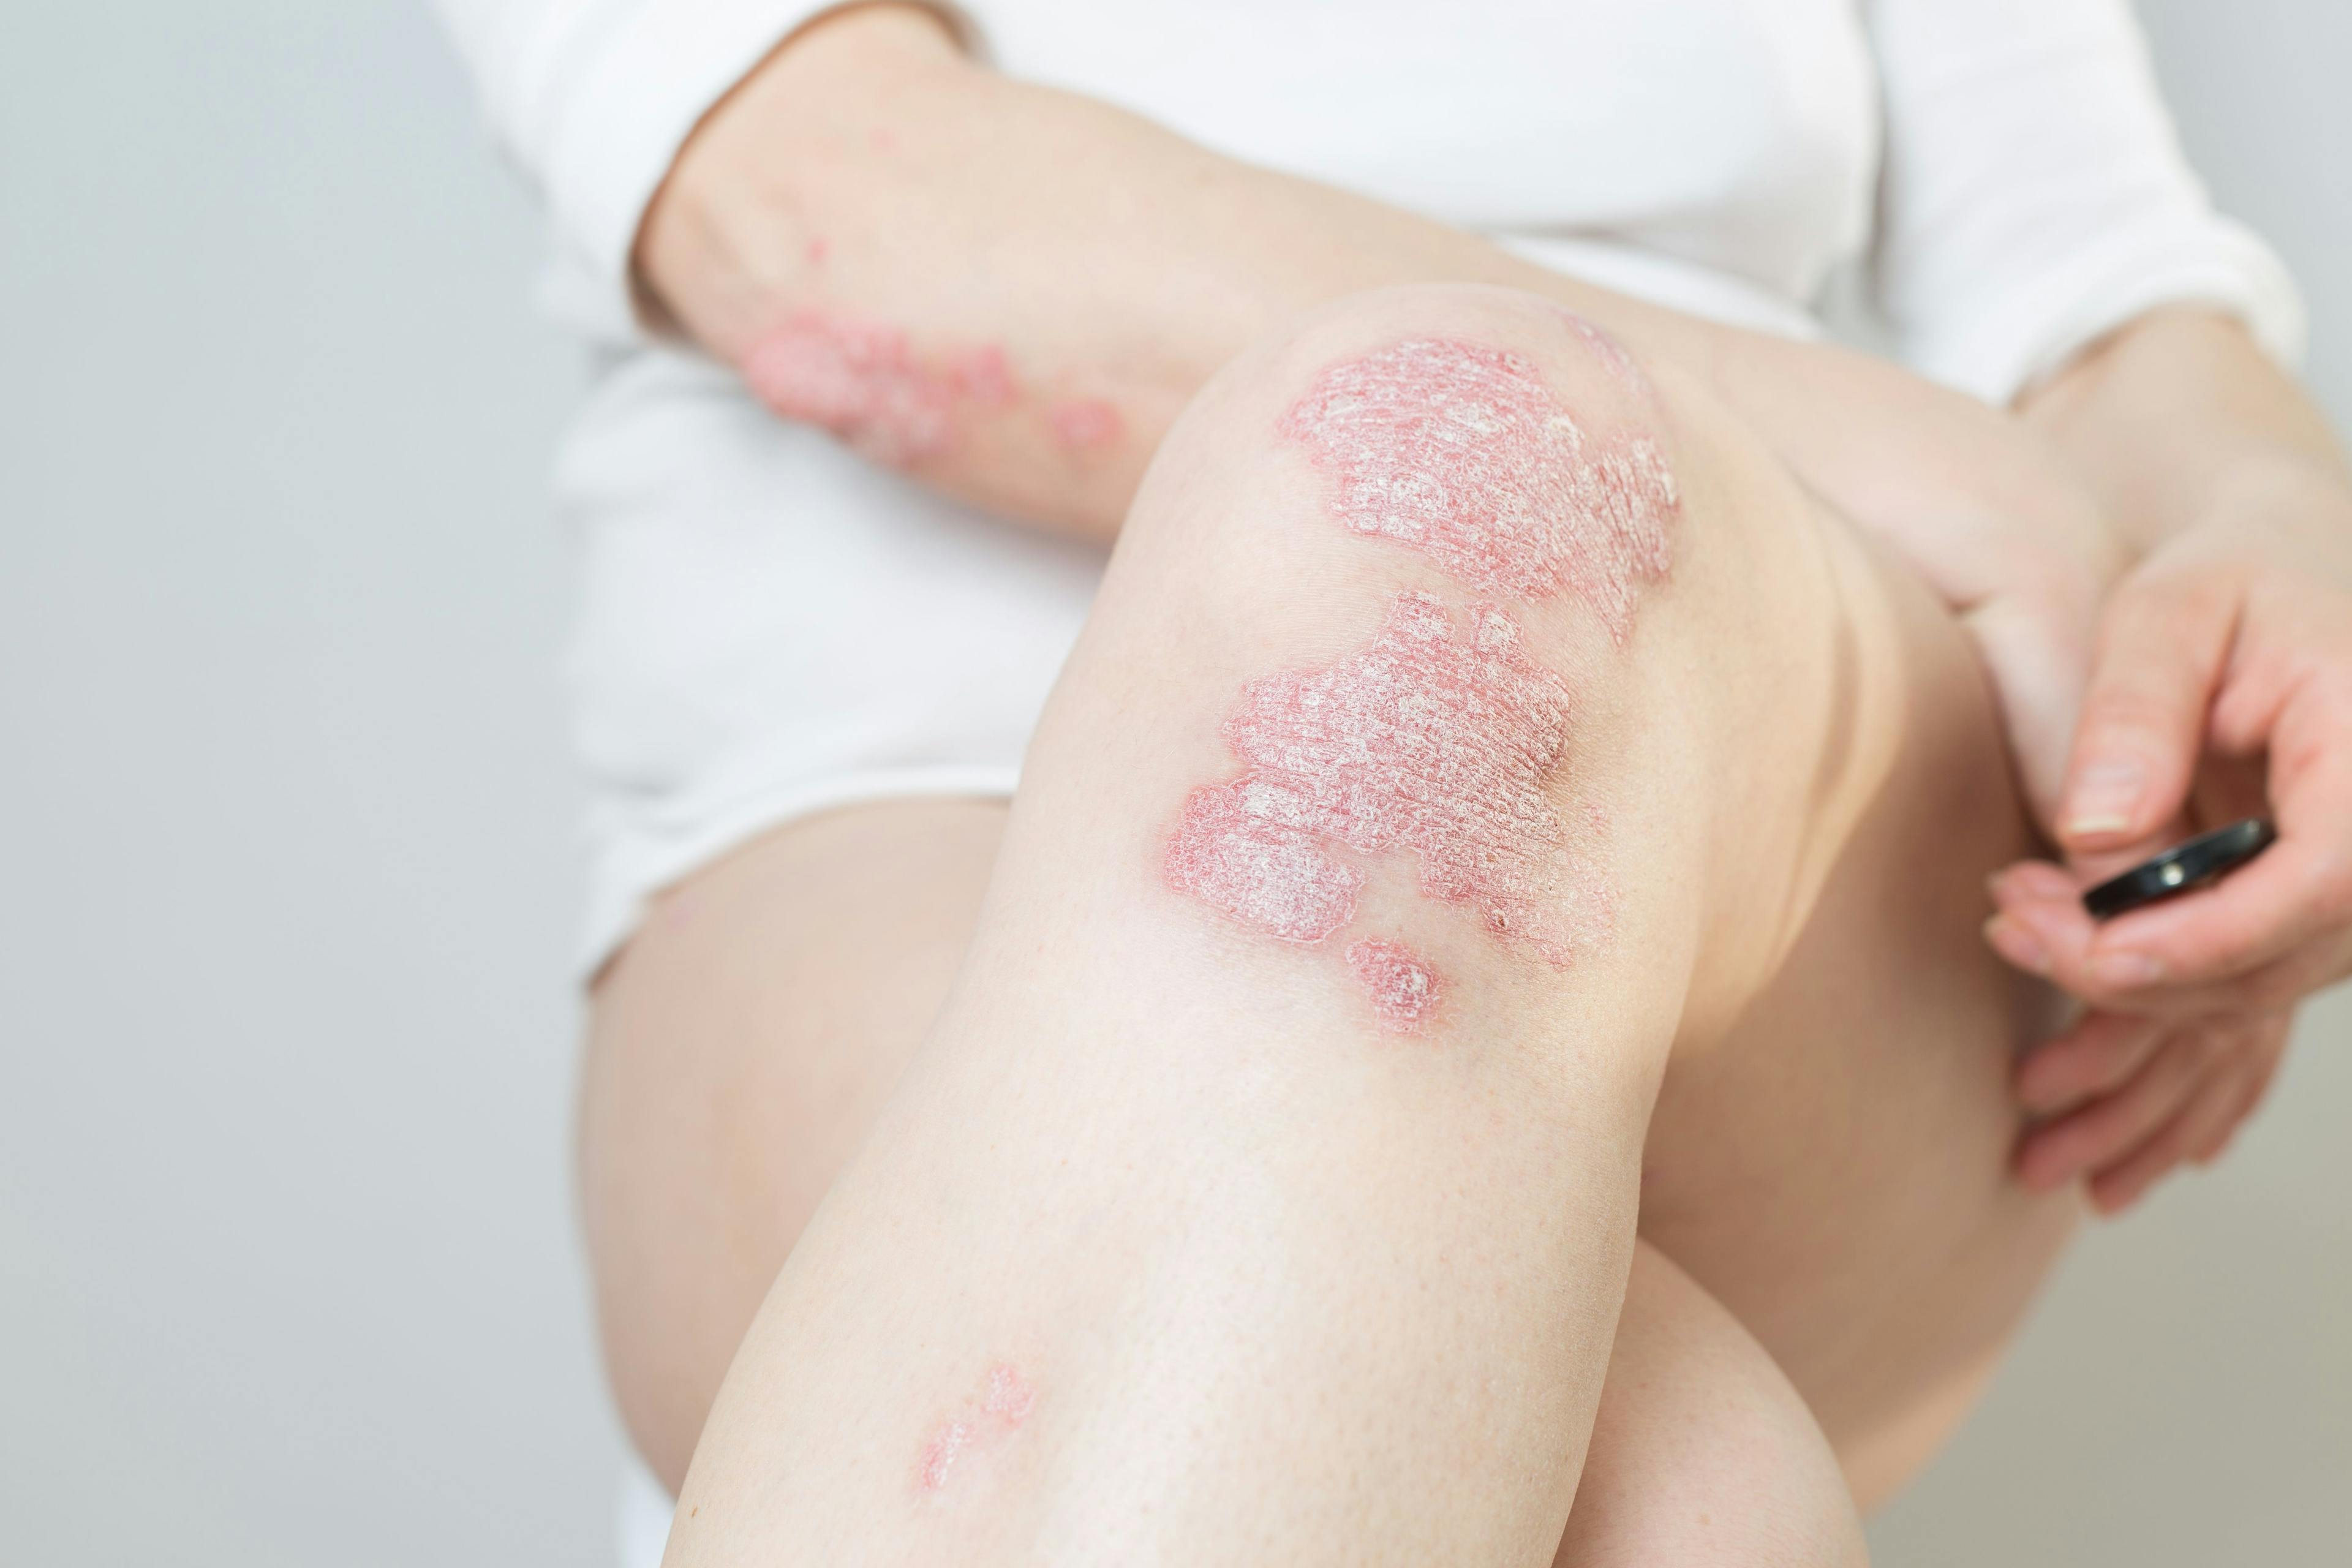 Arcutis submits roflumilast cream for treating plaque psoriasis in patients aged 2 to 11 years